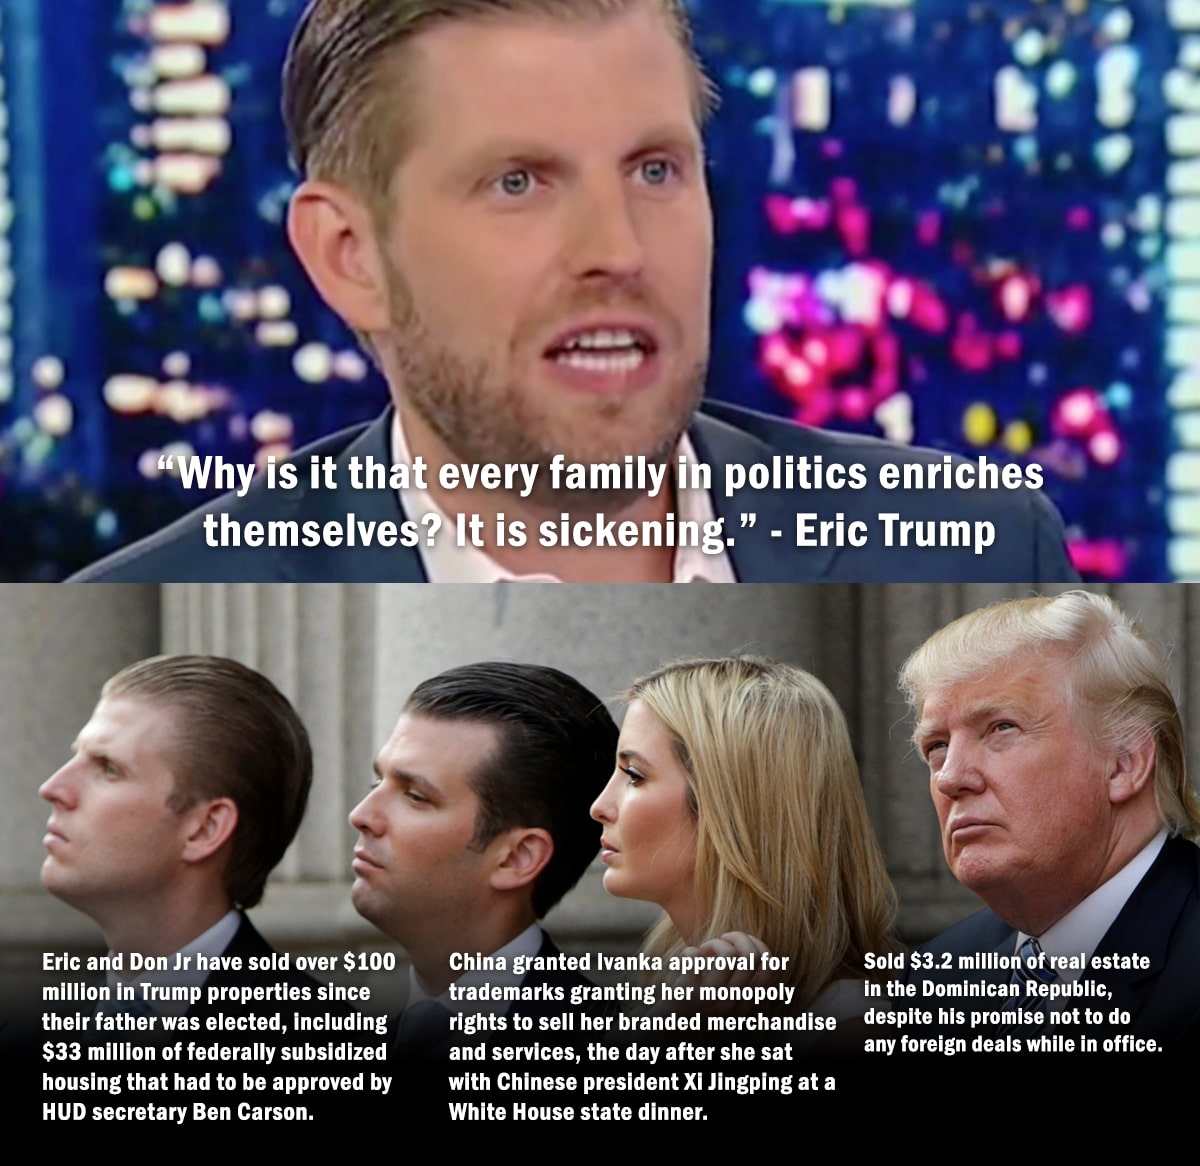 political political-memes political text: •m/hy sit th t every family I politics enriches themselve Eric and Don Jr have sold over $100 million in Trump properties since their father was elected, including $33 million of federally subsidized housing that had to be approved by HUD secretary Ben Carson. It is sickenin .